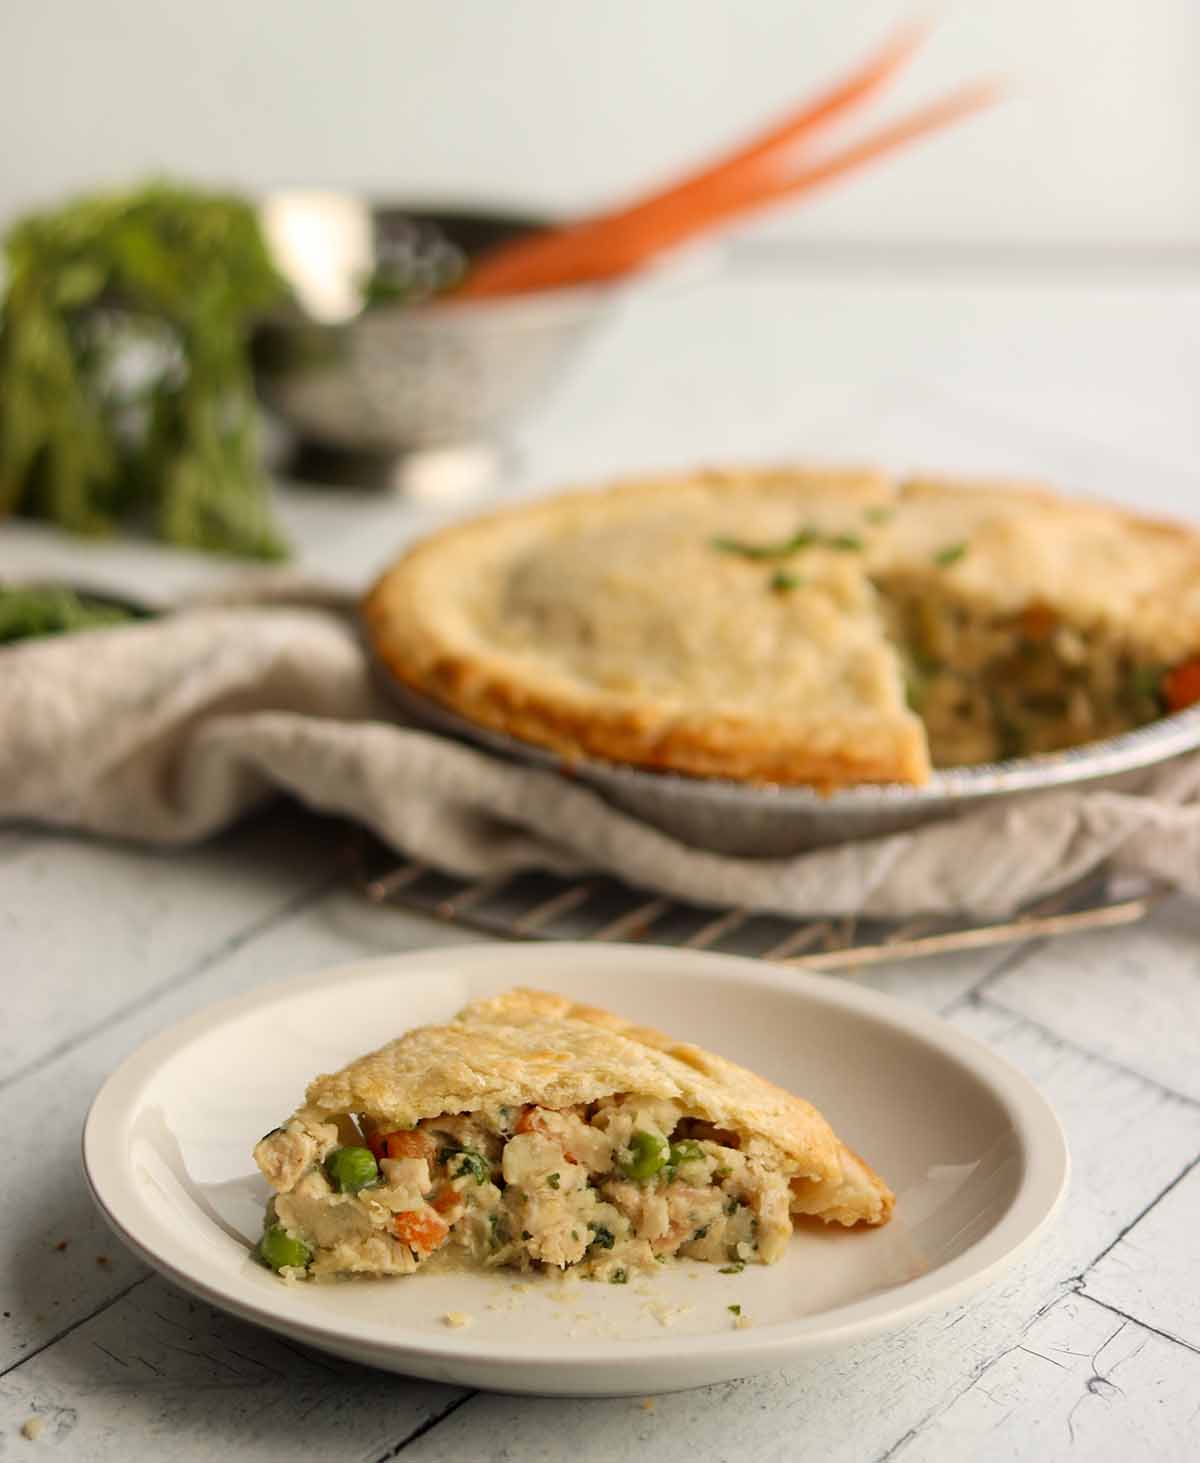 Gluten free dairy free chicken pot pie slice on a place with whole pie in background. Surrounded by fresh ingredients and linen cloth. 